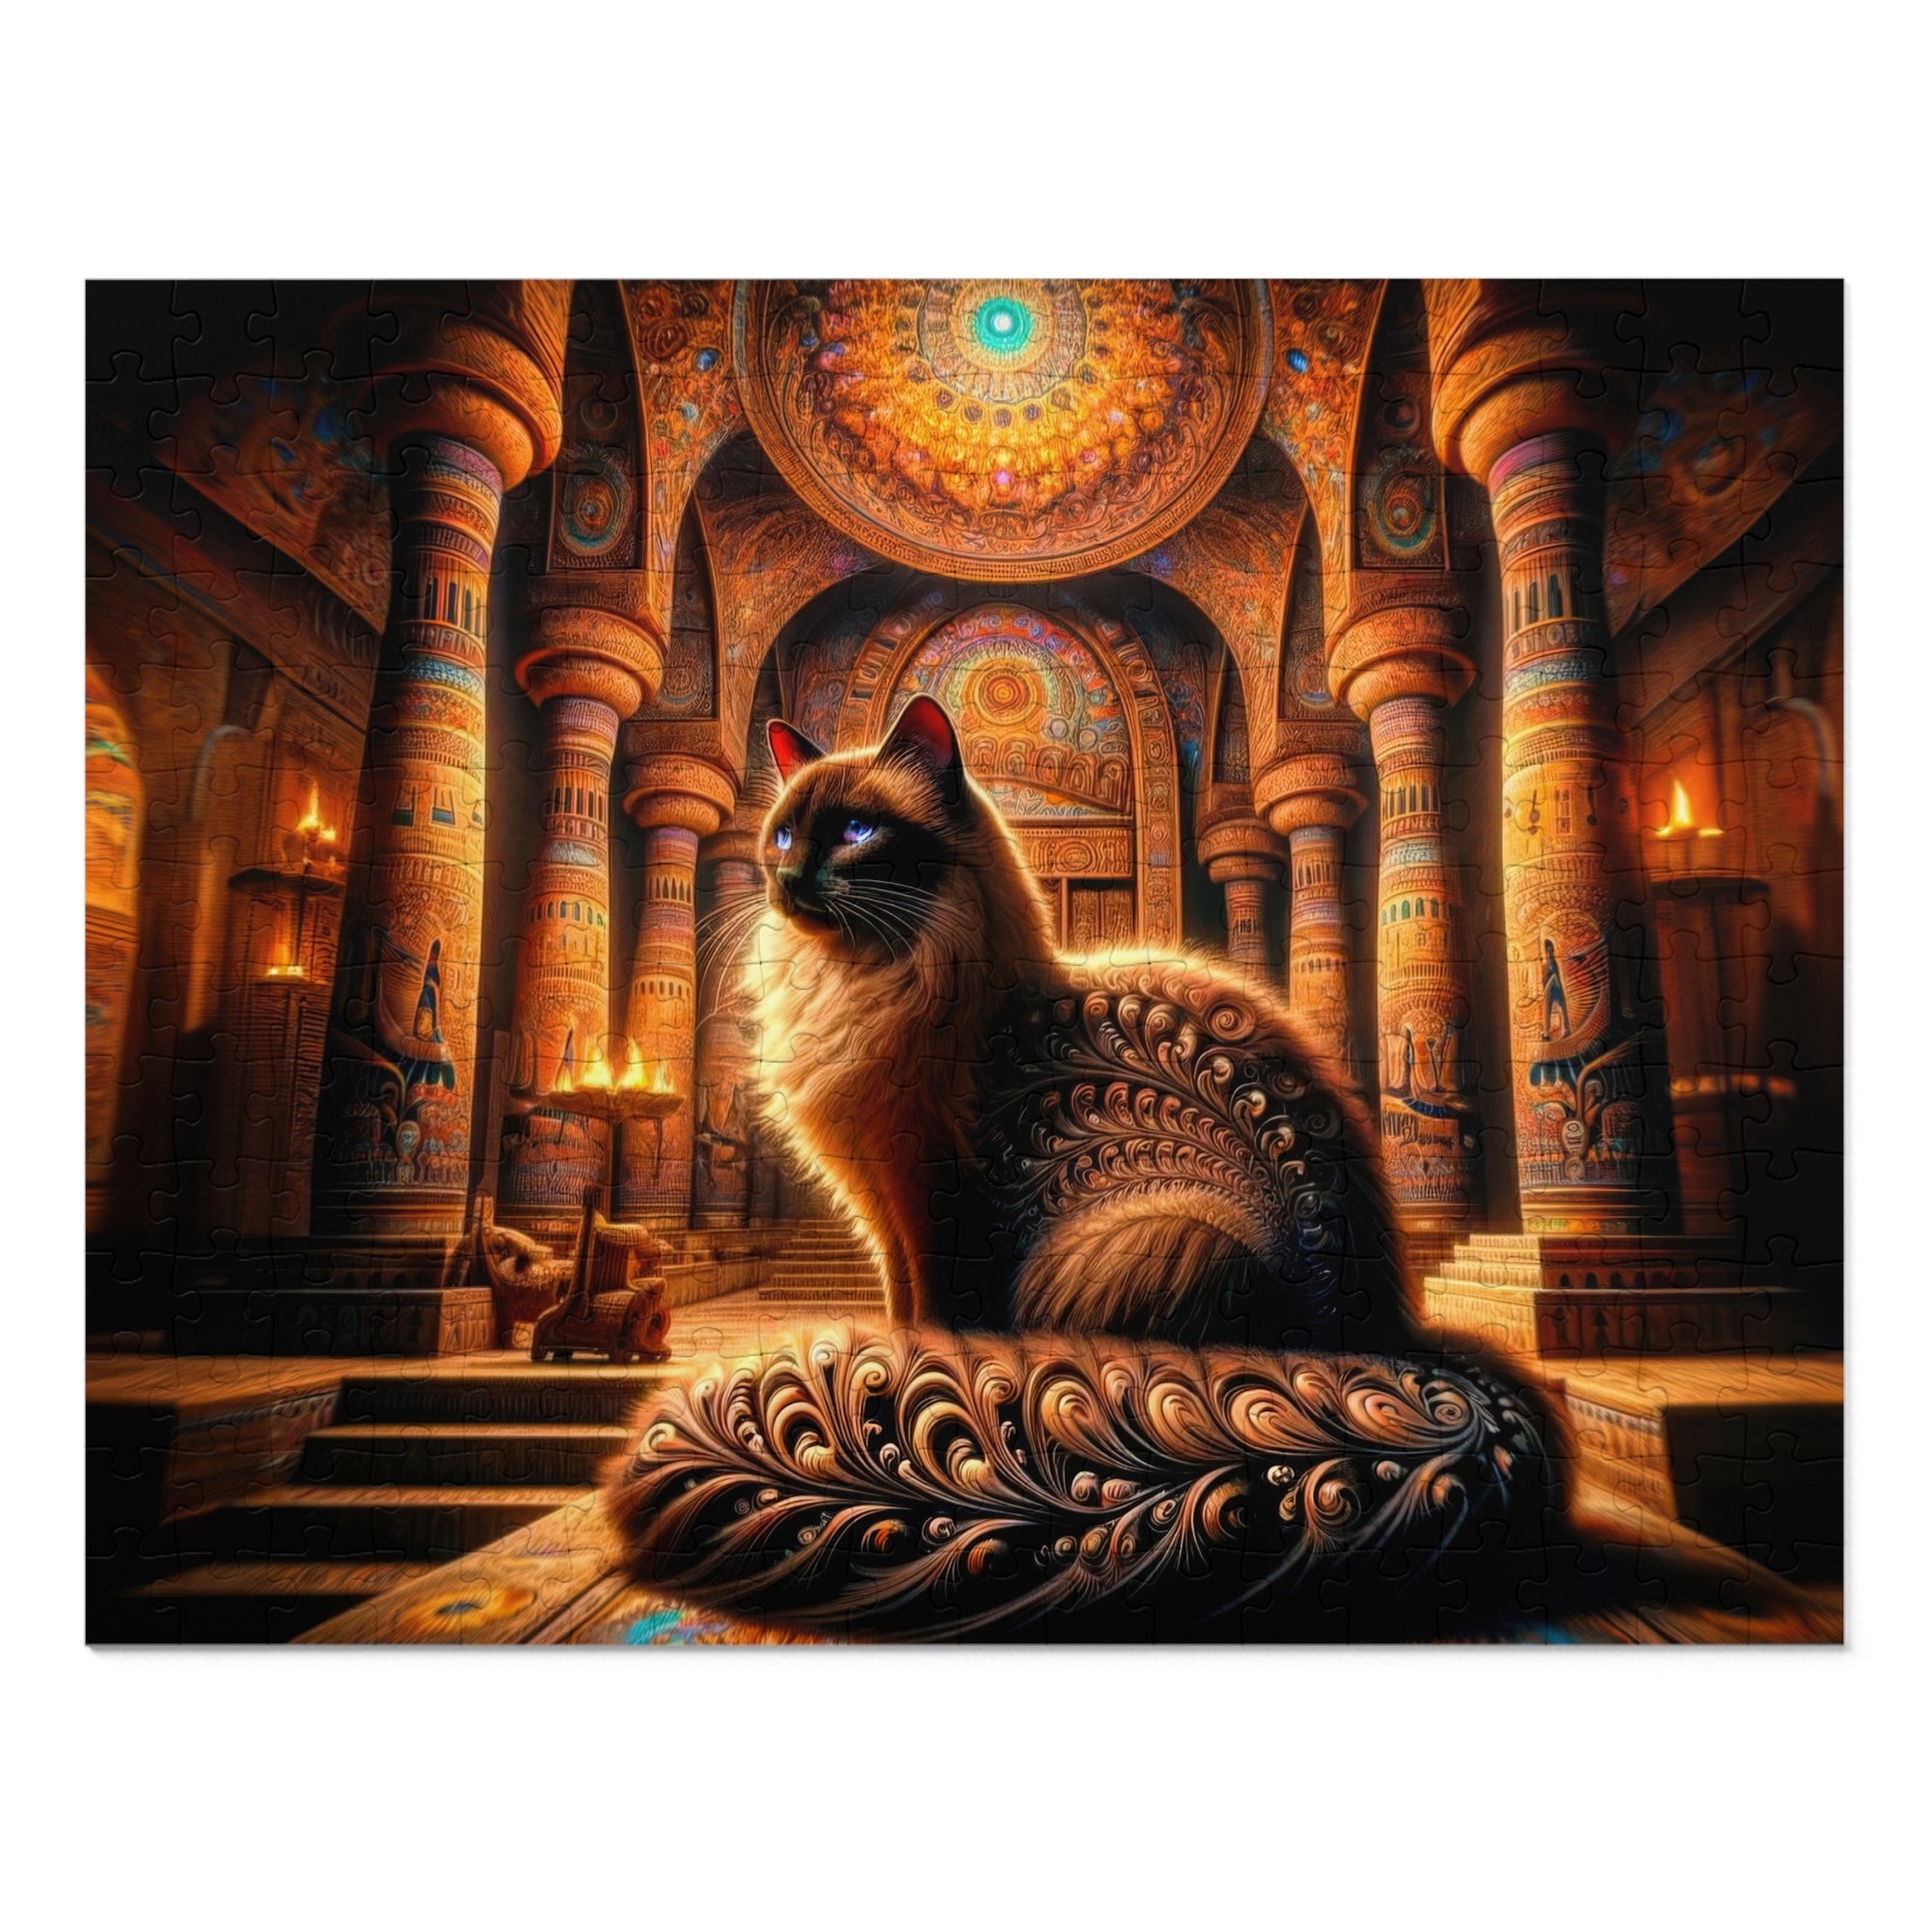 Siamese Oracle in the Temple of Time Puzzle